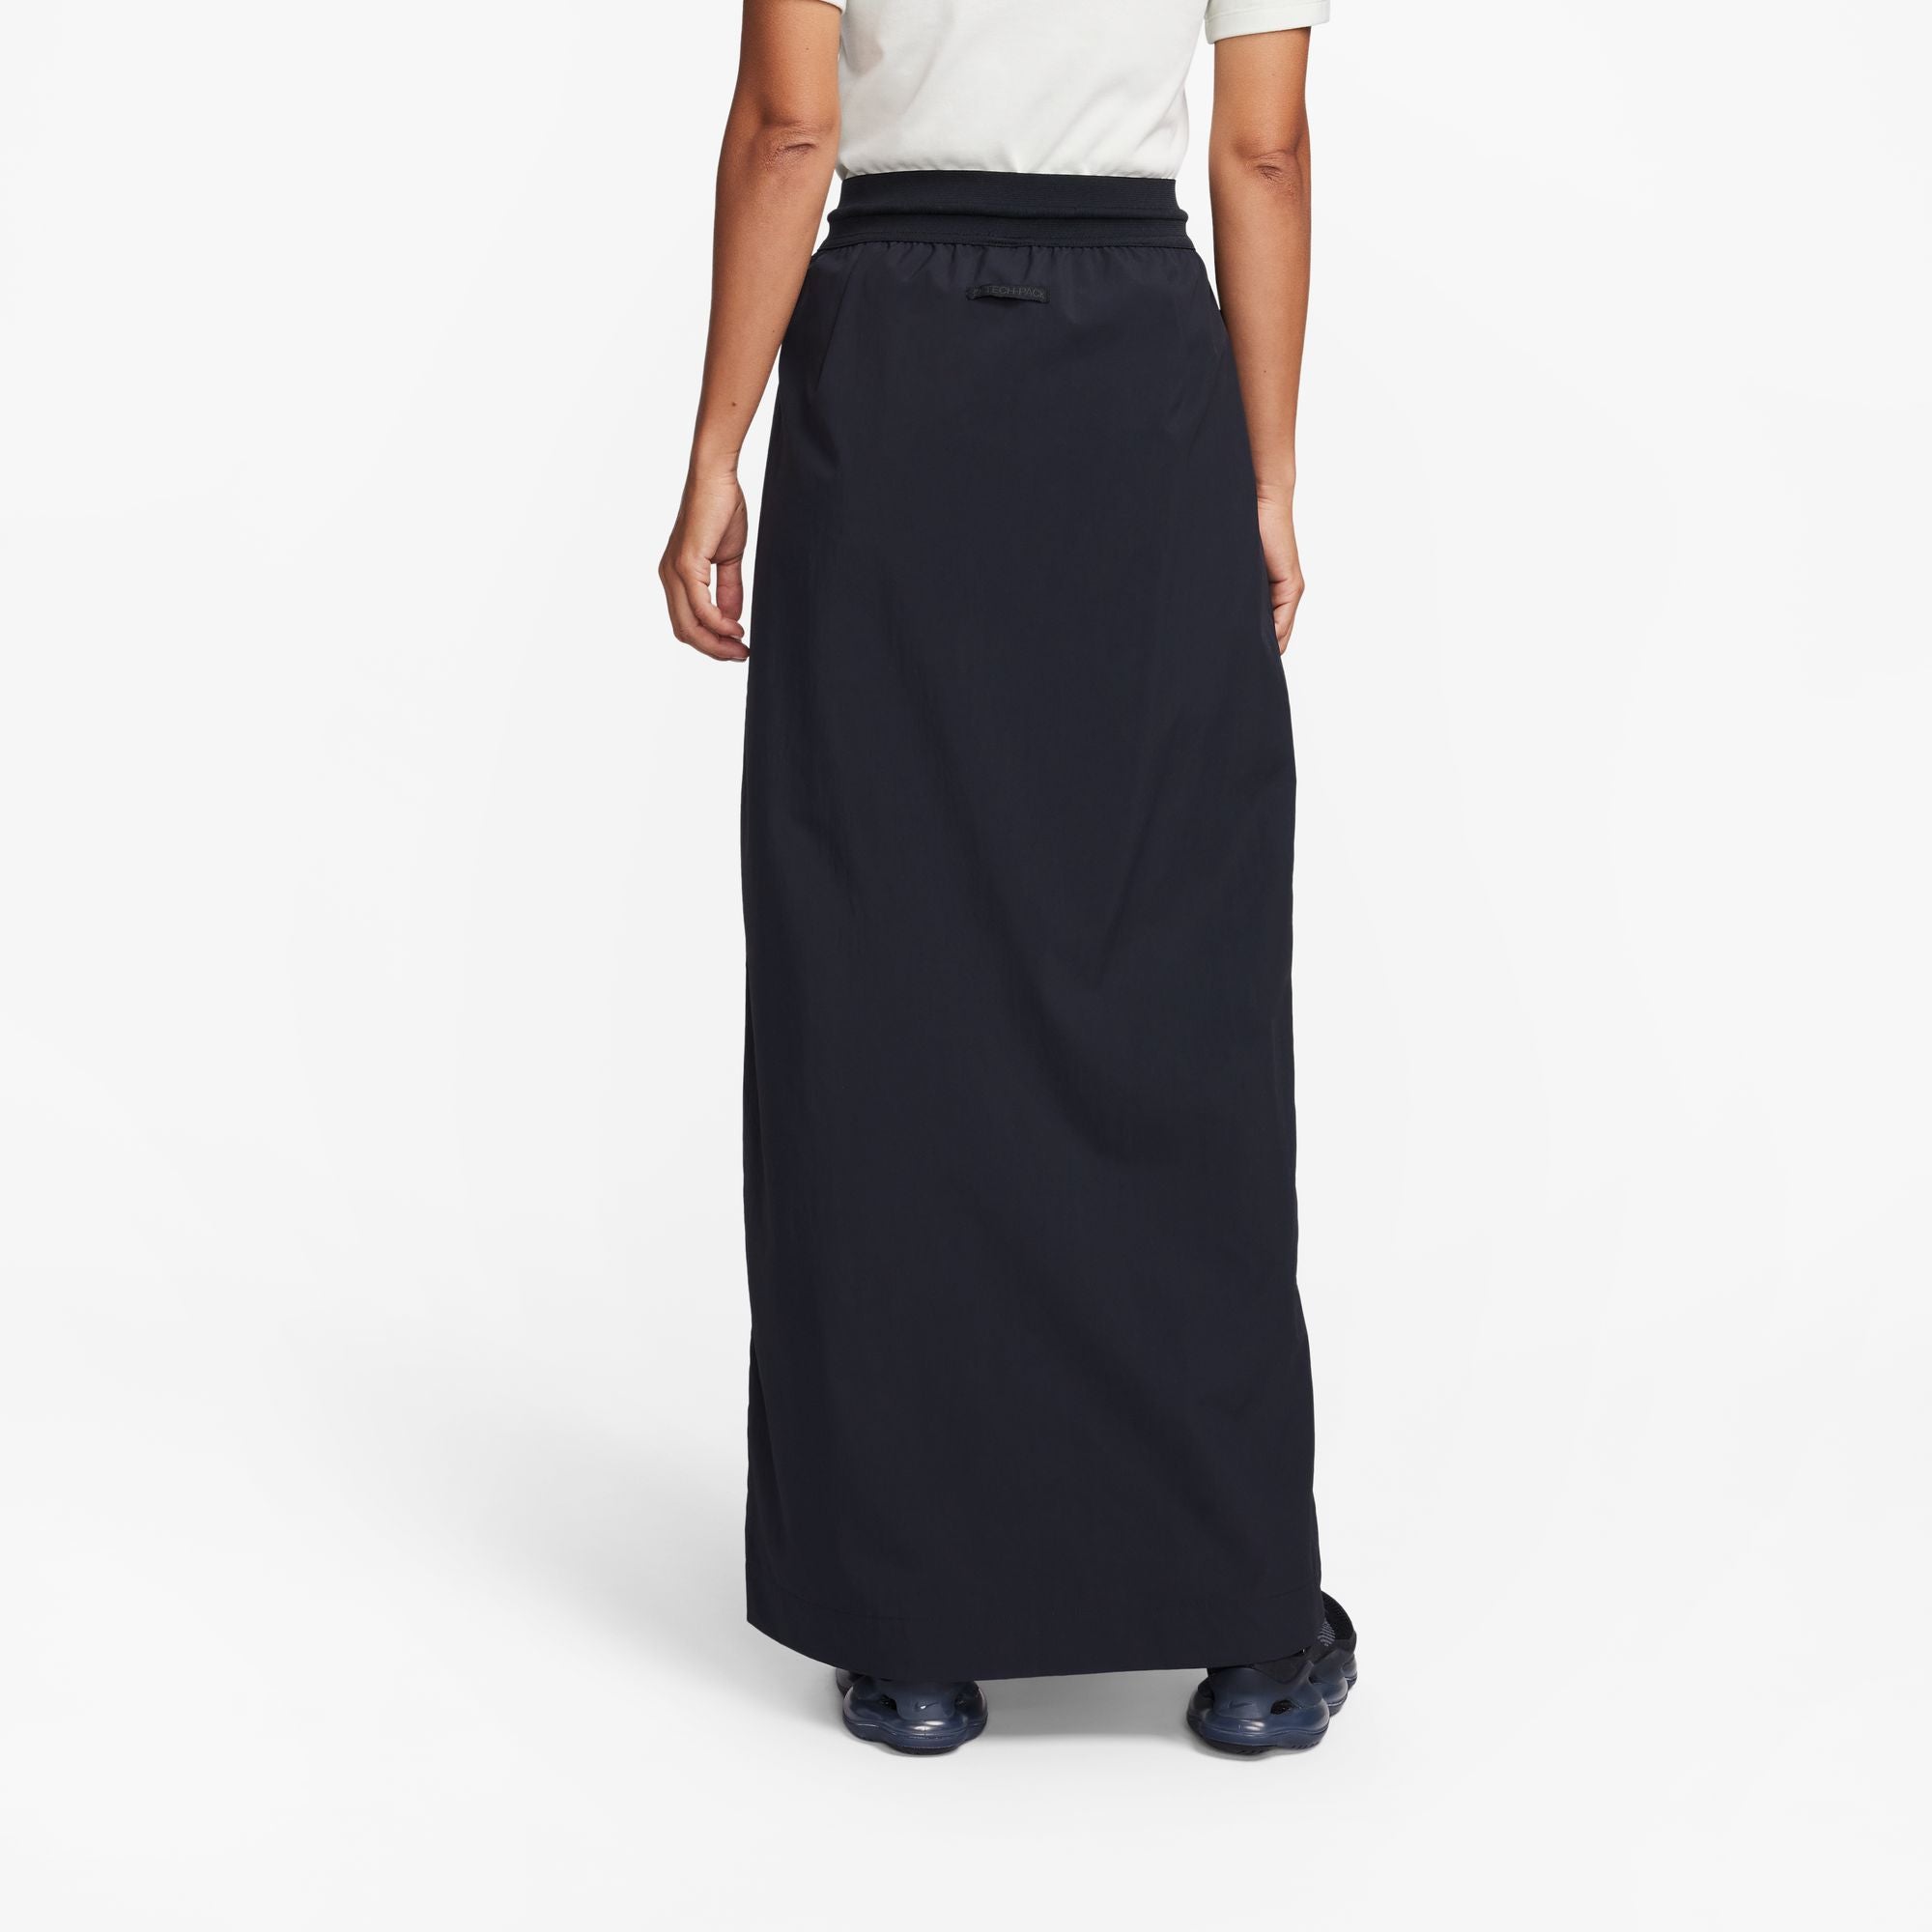 NSW TECH PACK REPEL HIGH-WAISTED MAXI SKIRT - BLACK/ANTHRACITE/ANTHRACITE